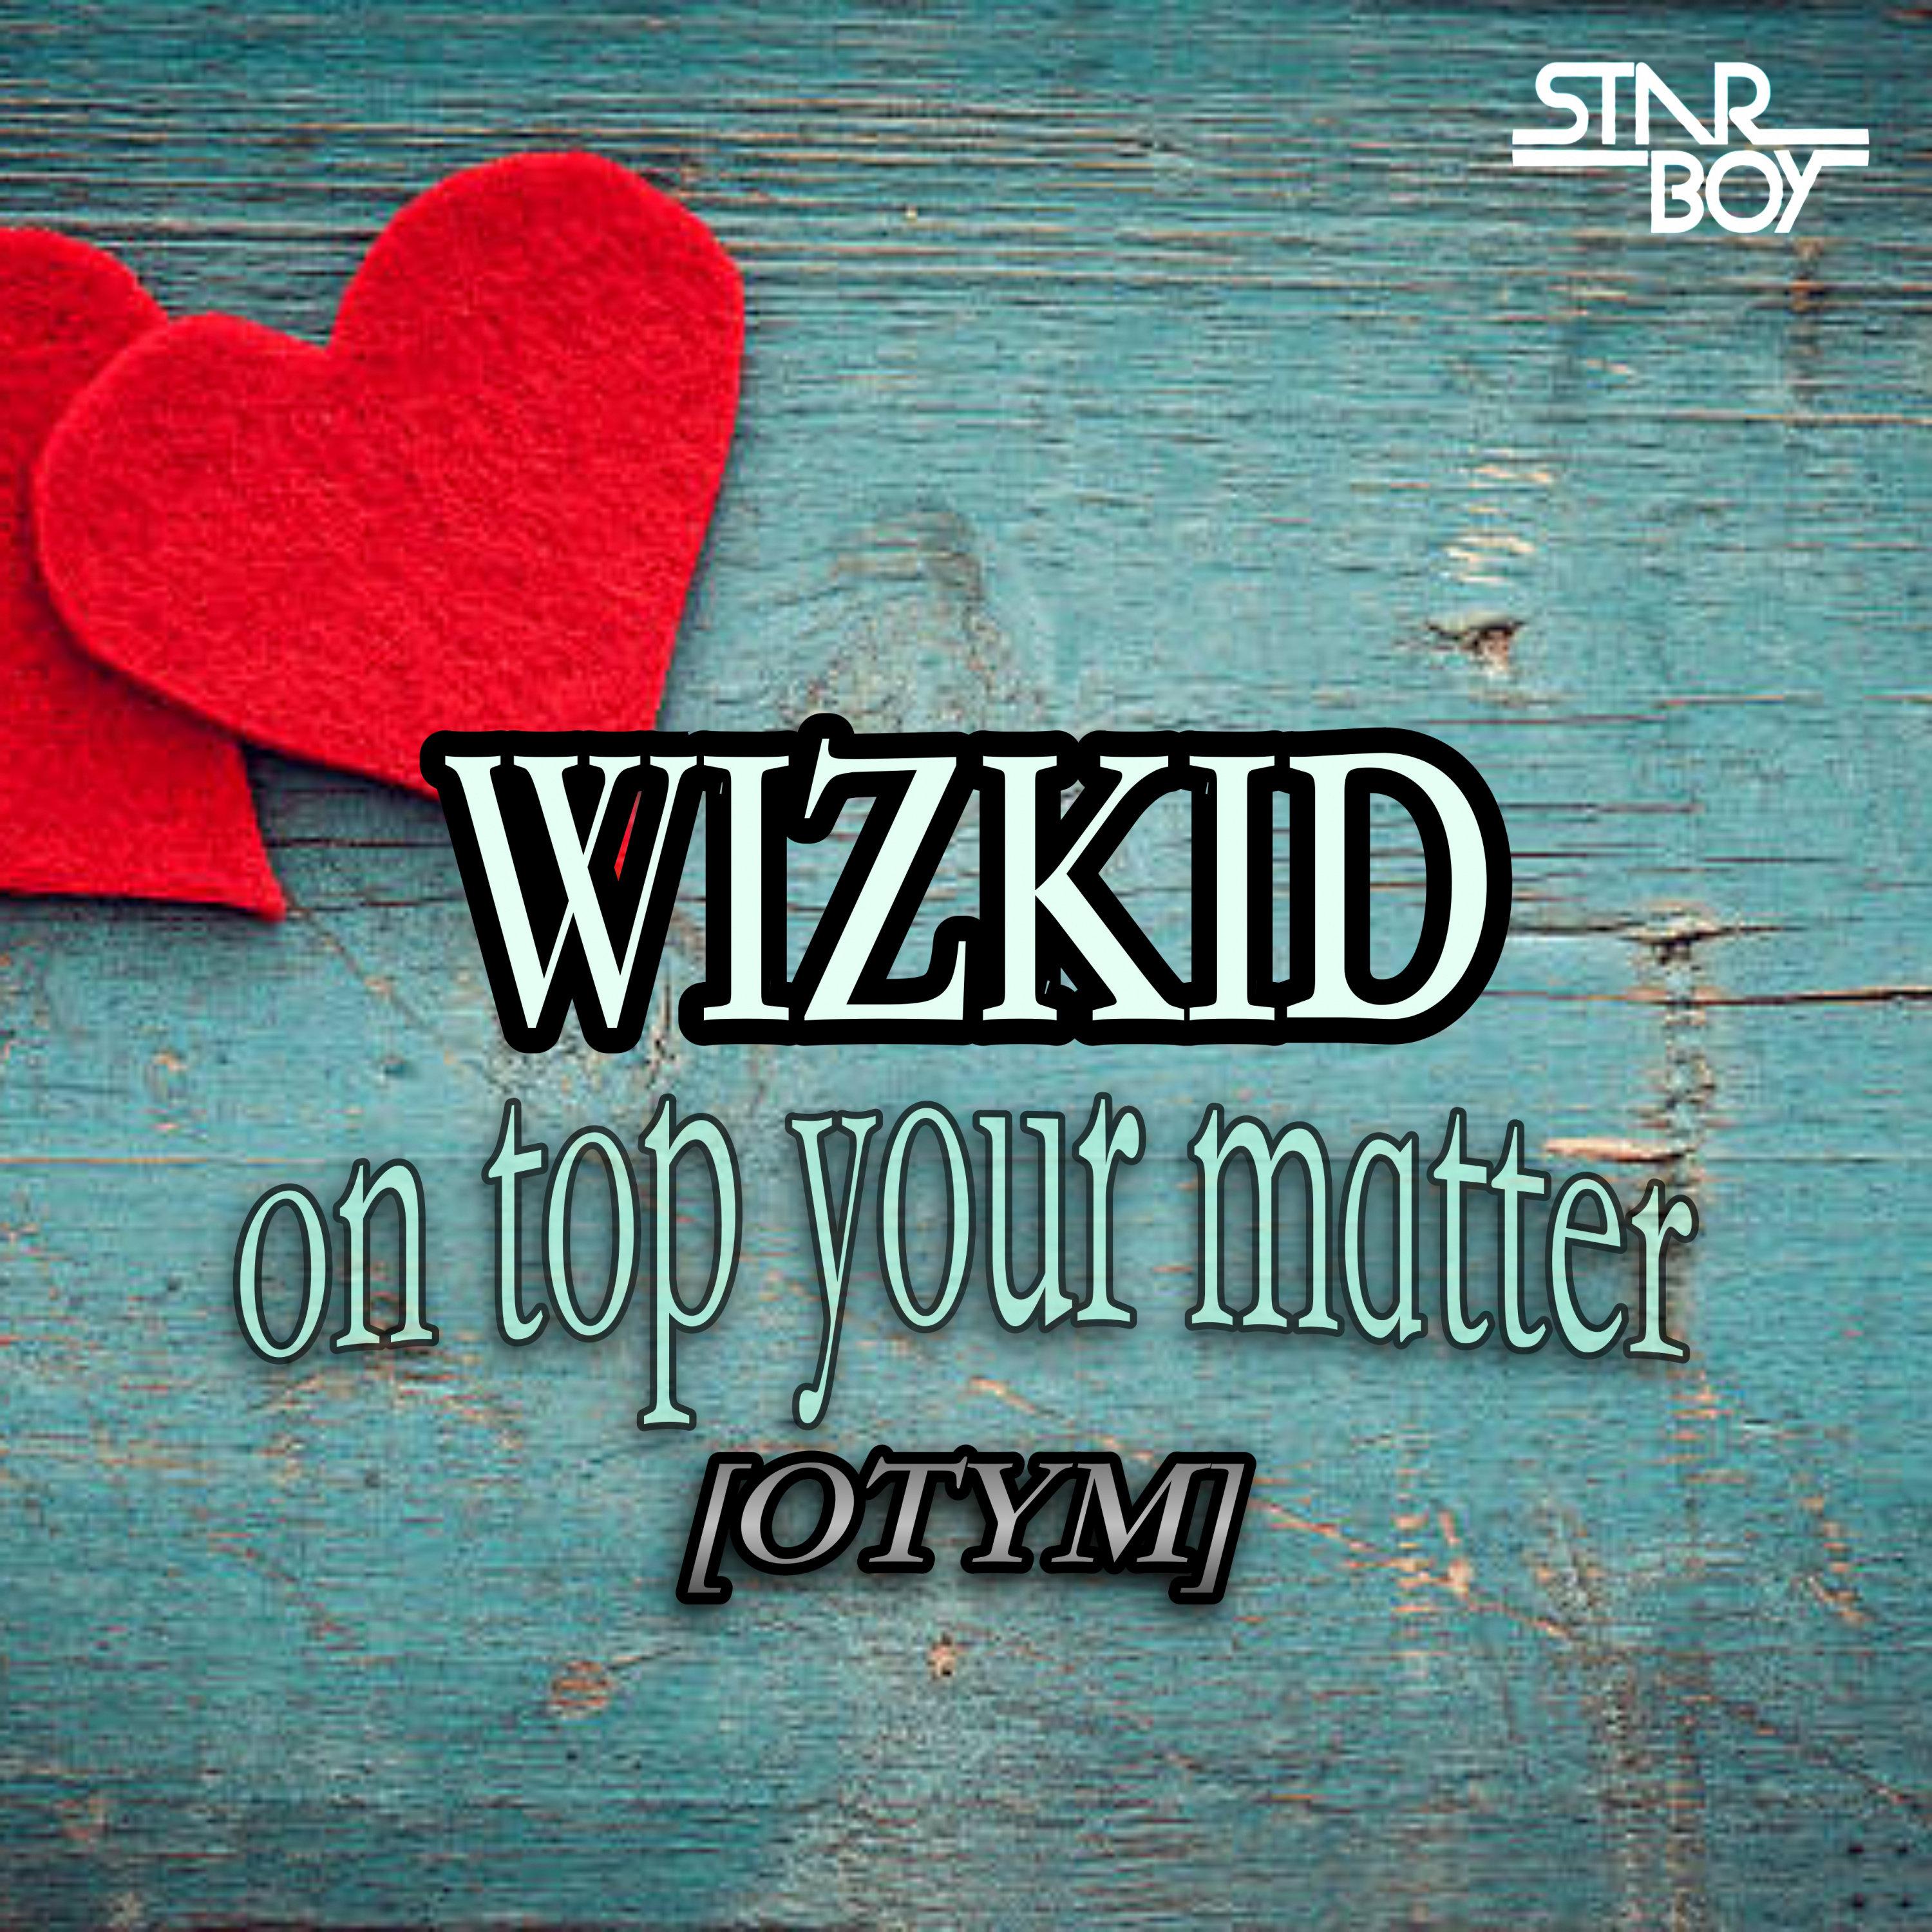 STARBOY - On Top Your Matter [OTYM]